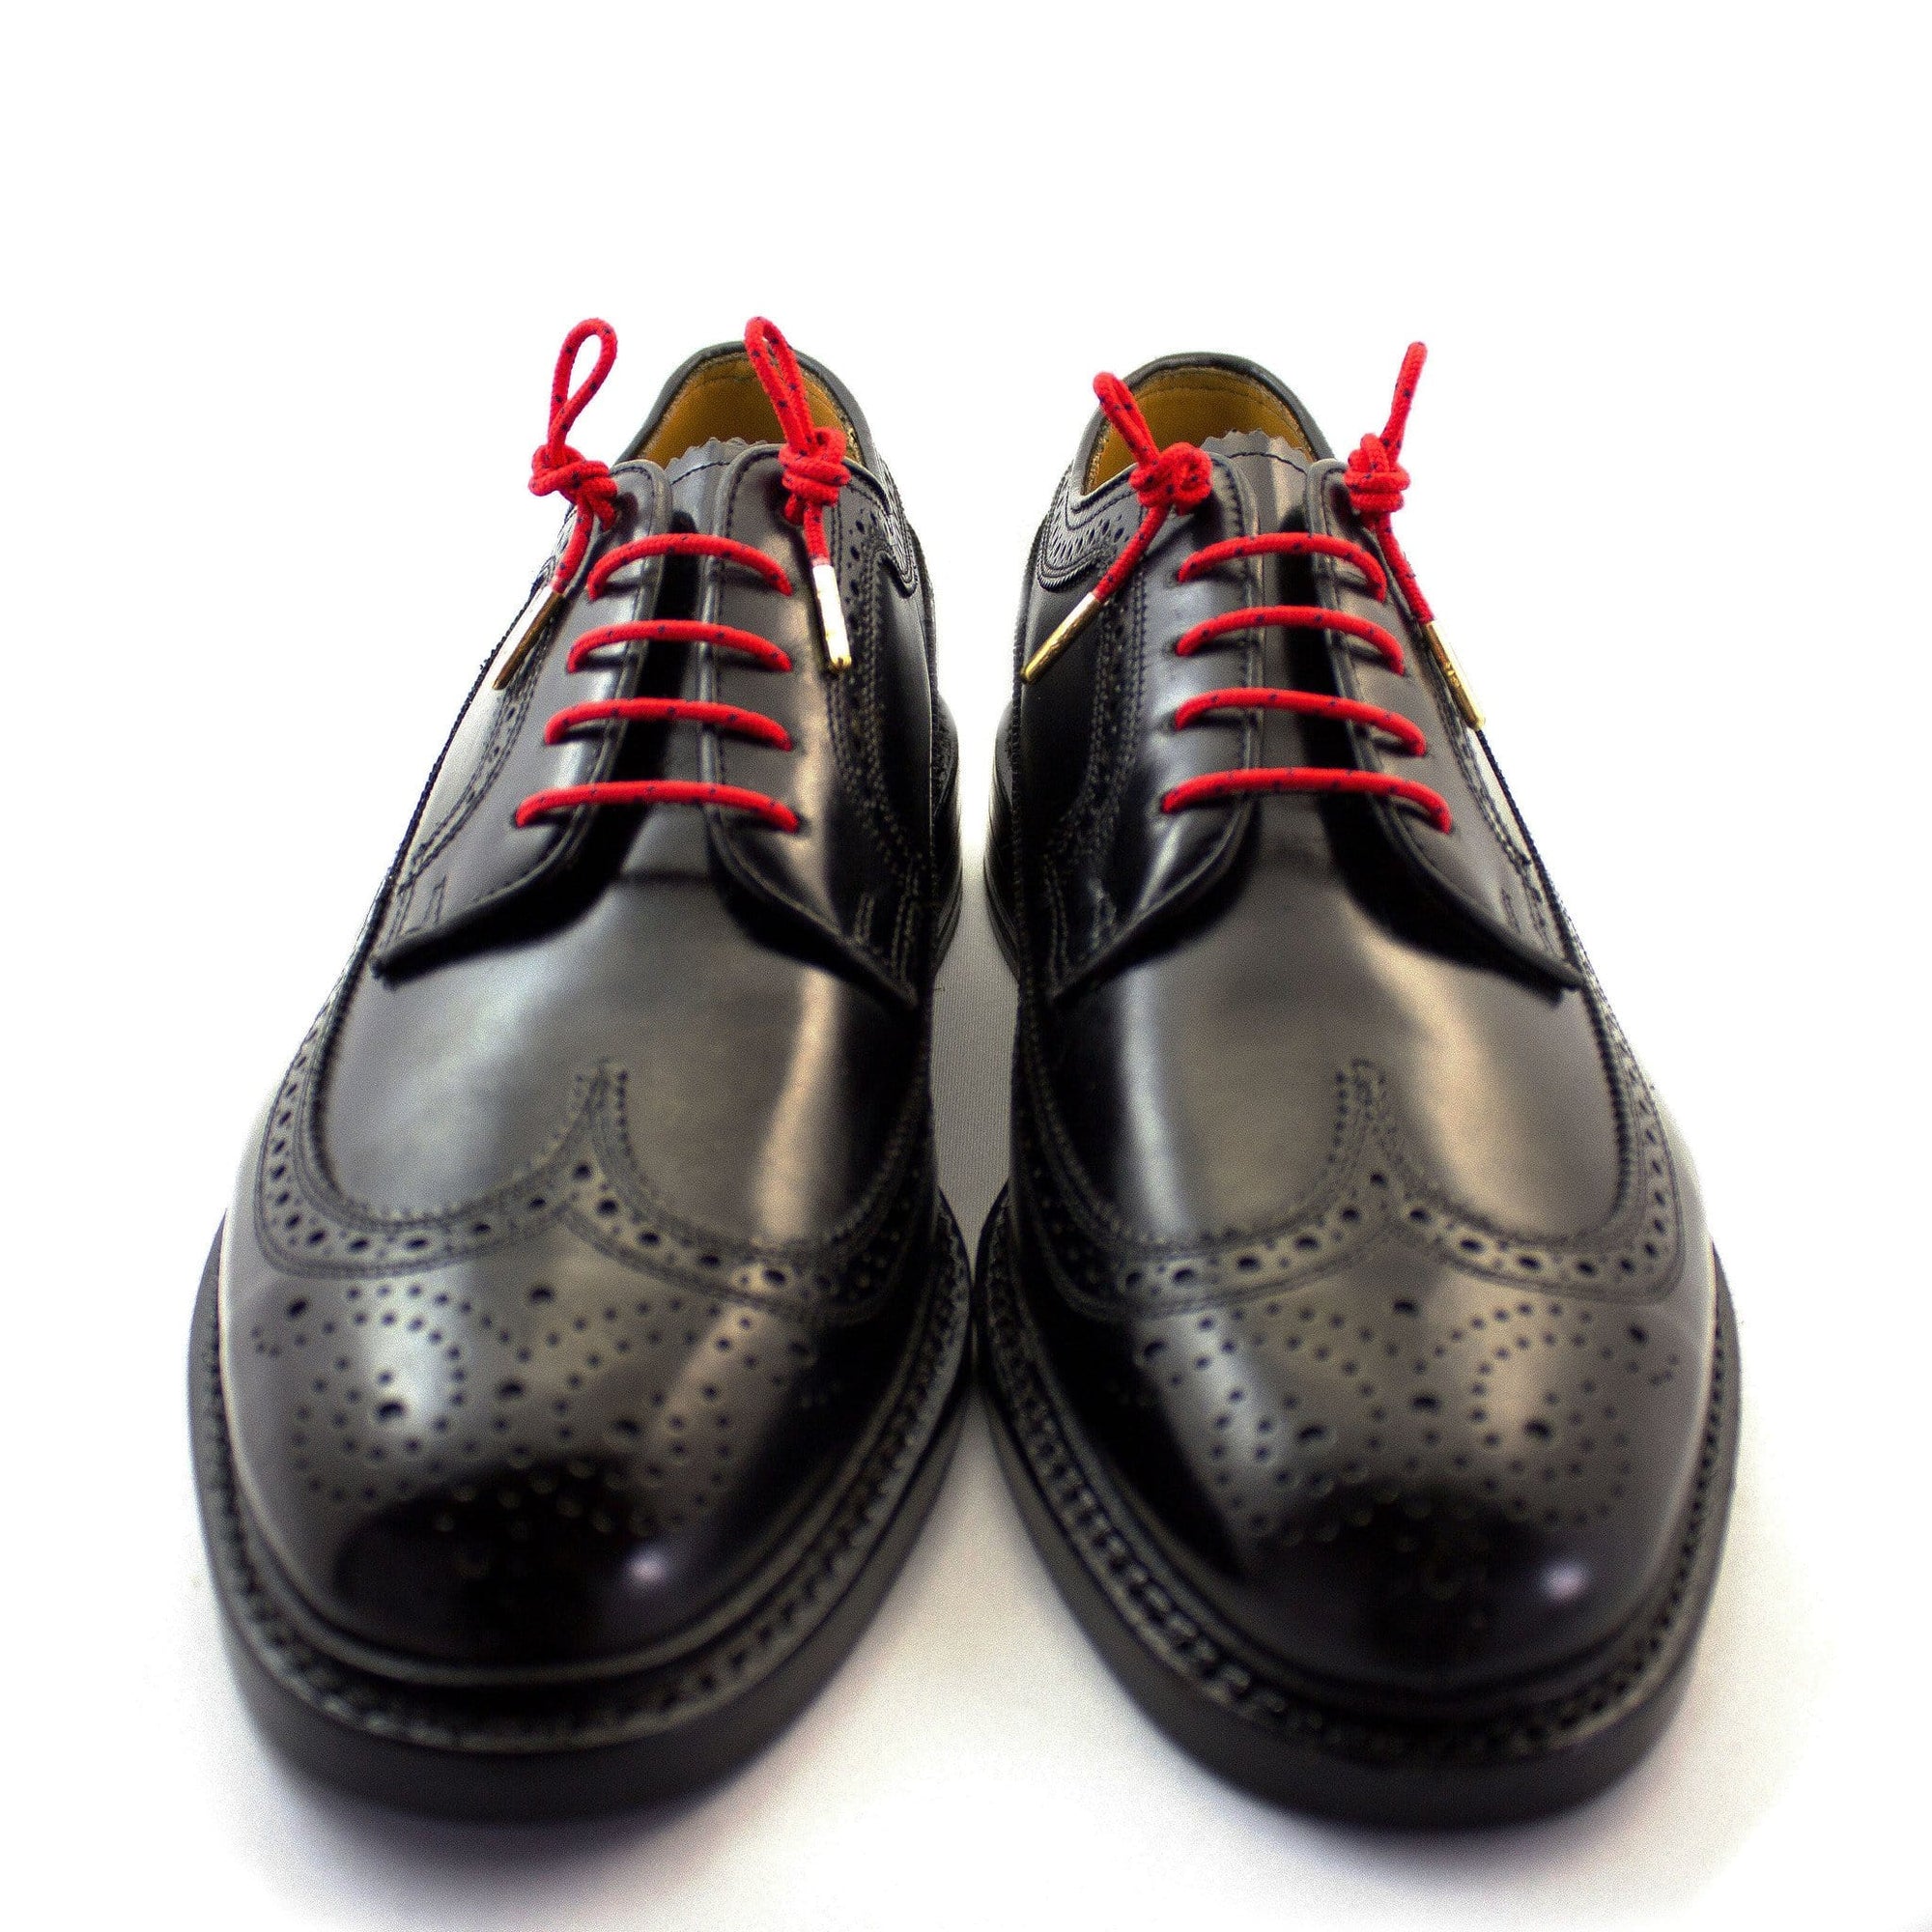 Red and black dots laces for dress shoes, Length: 32"/81cm-Stolen Riches